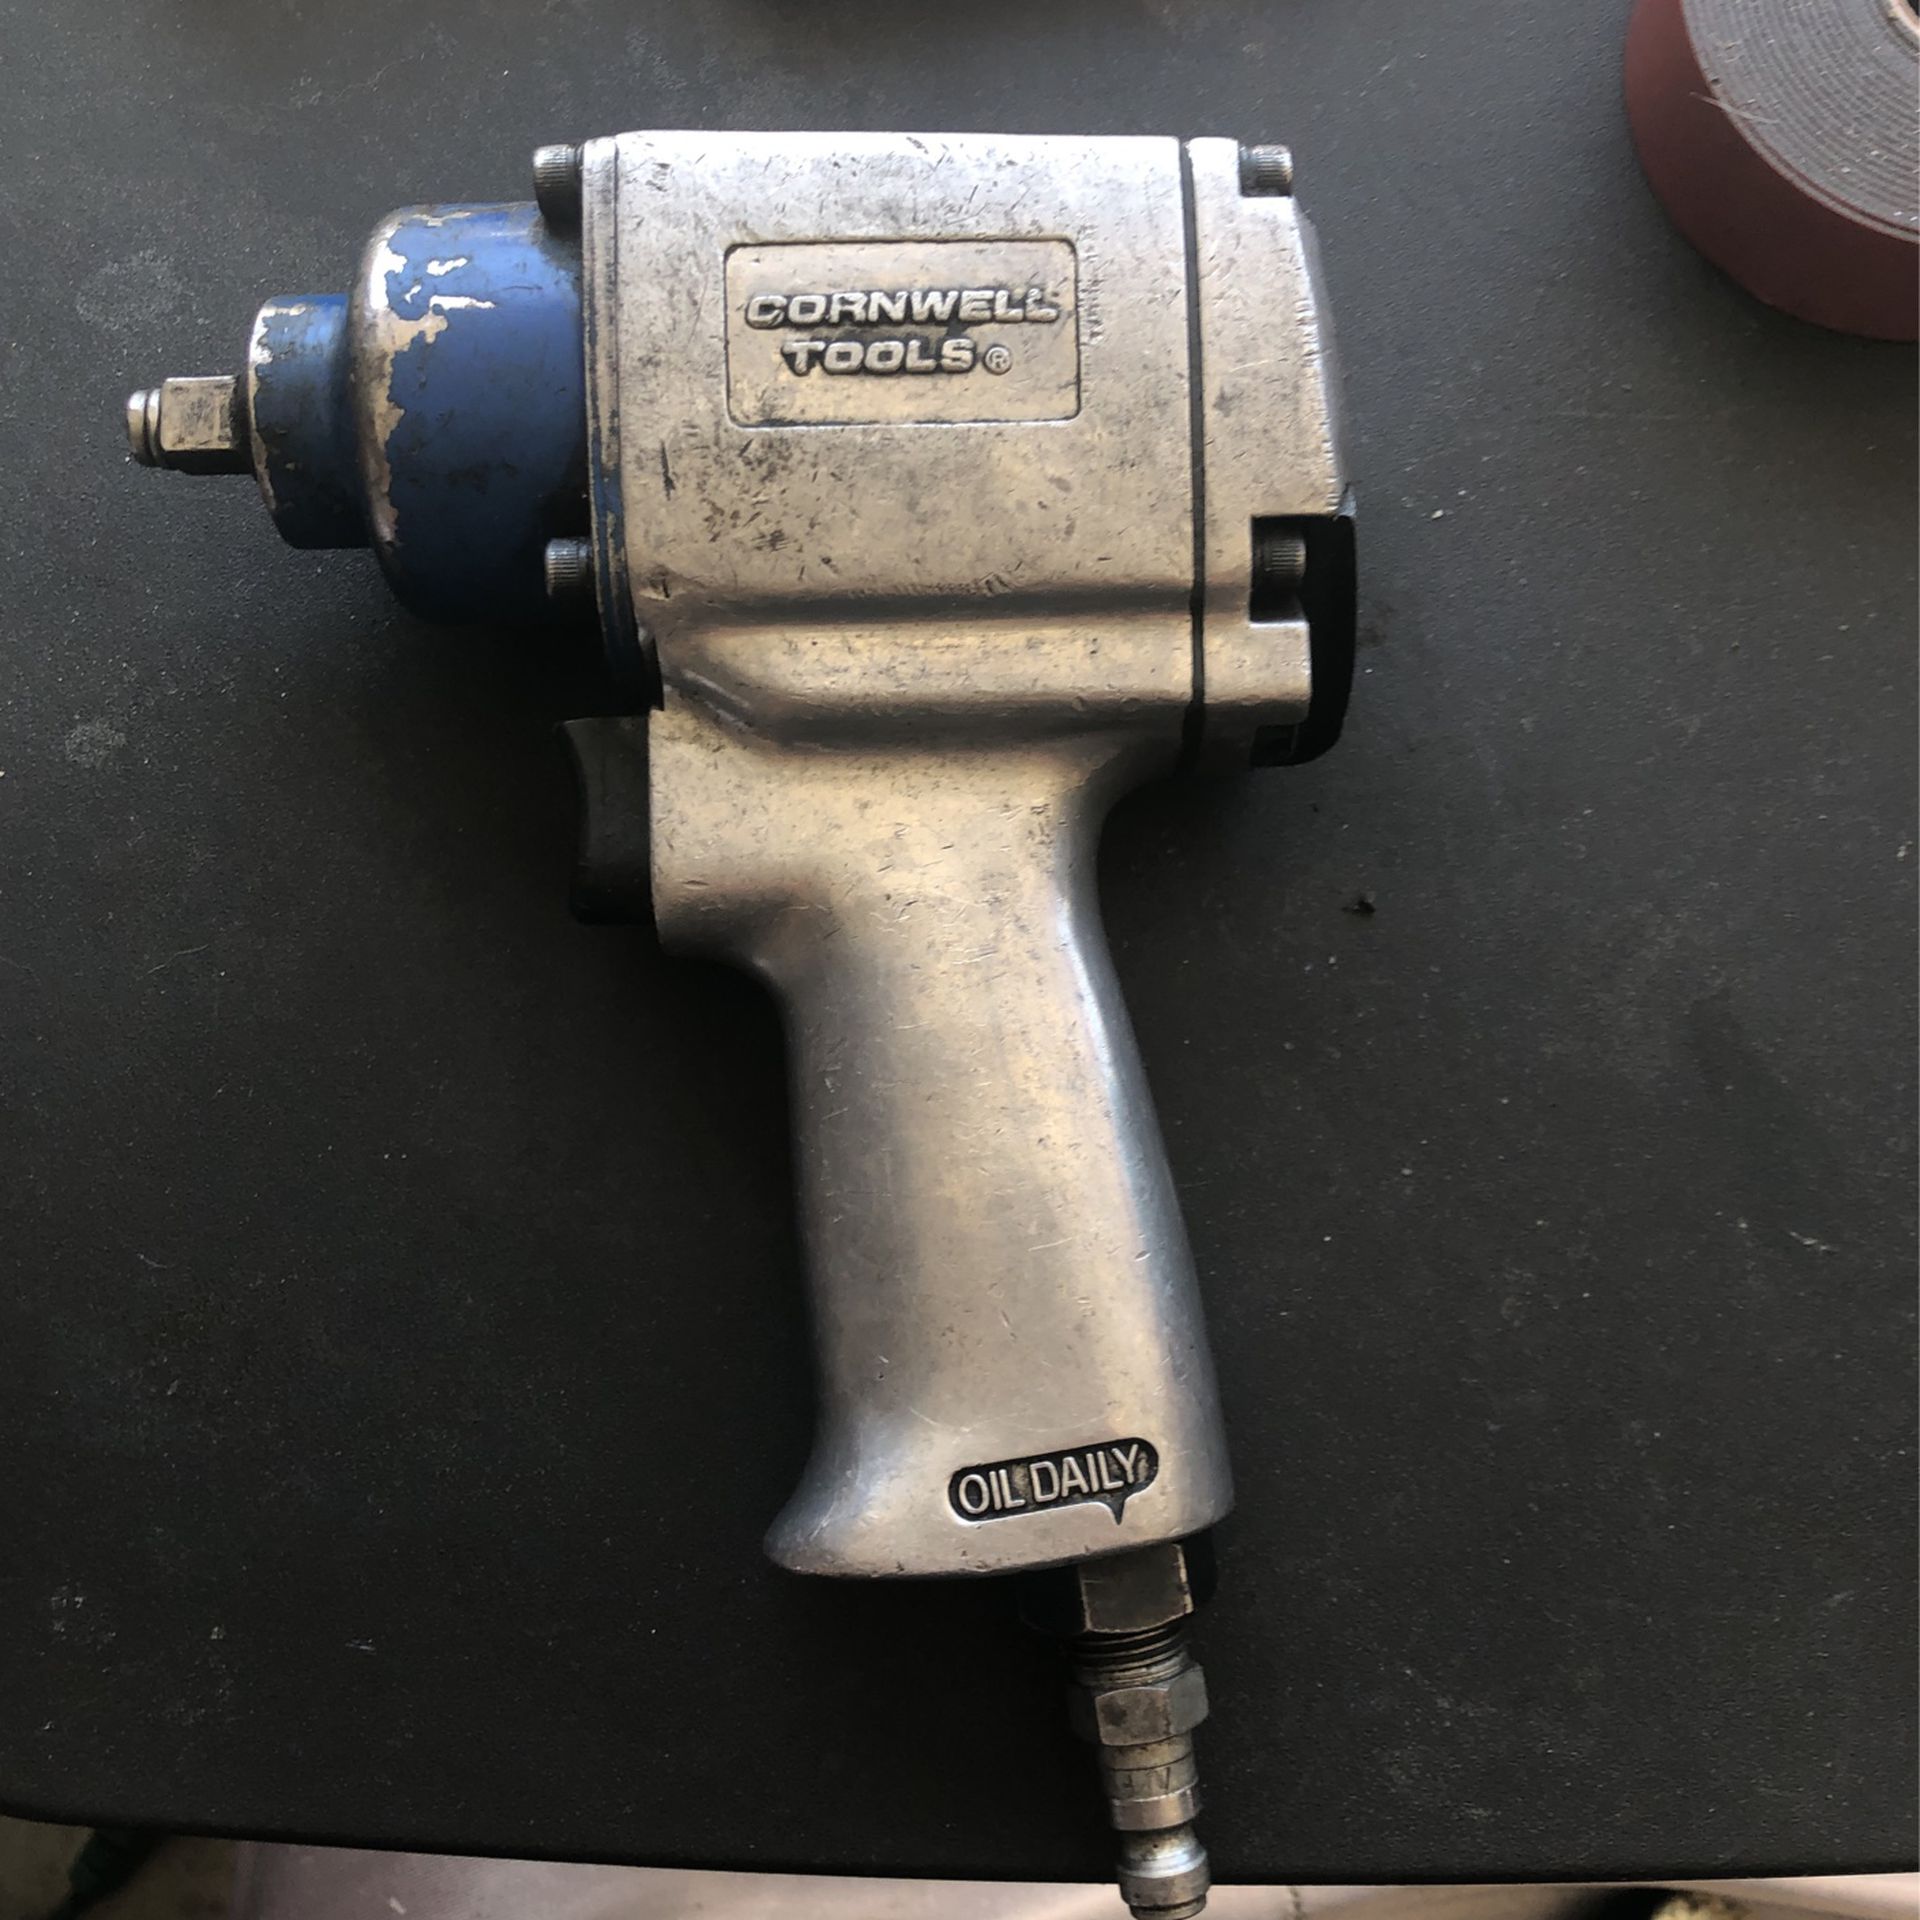 Cornwall Tools Impact Wrench